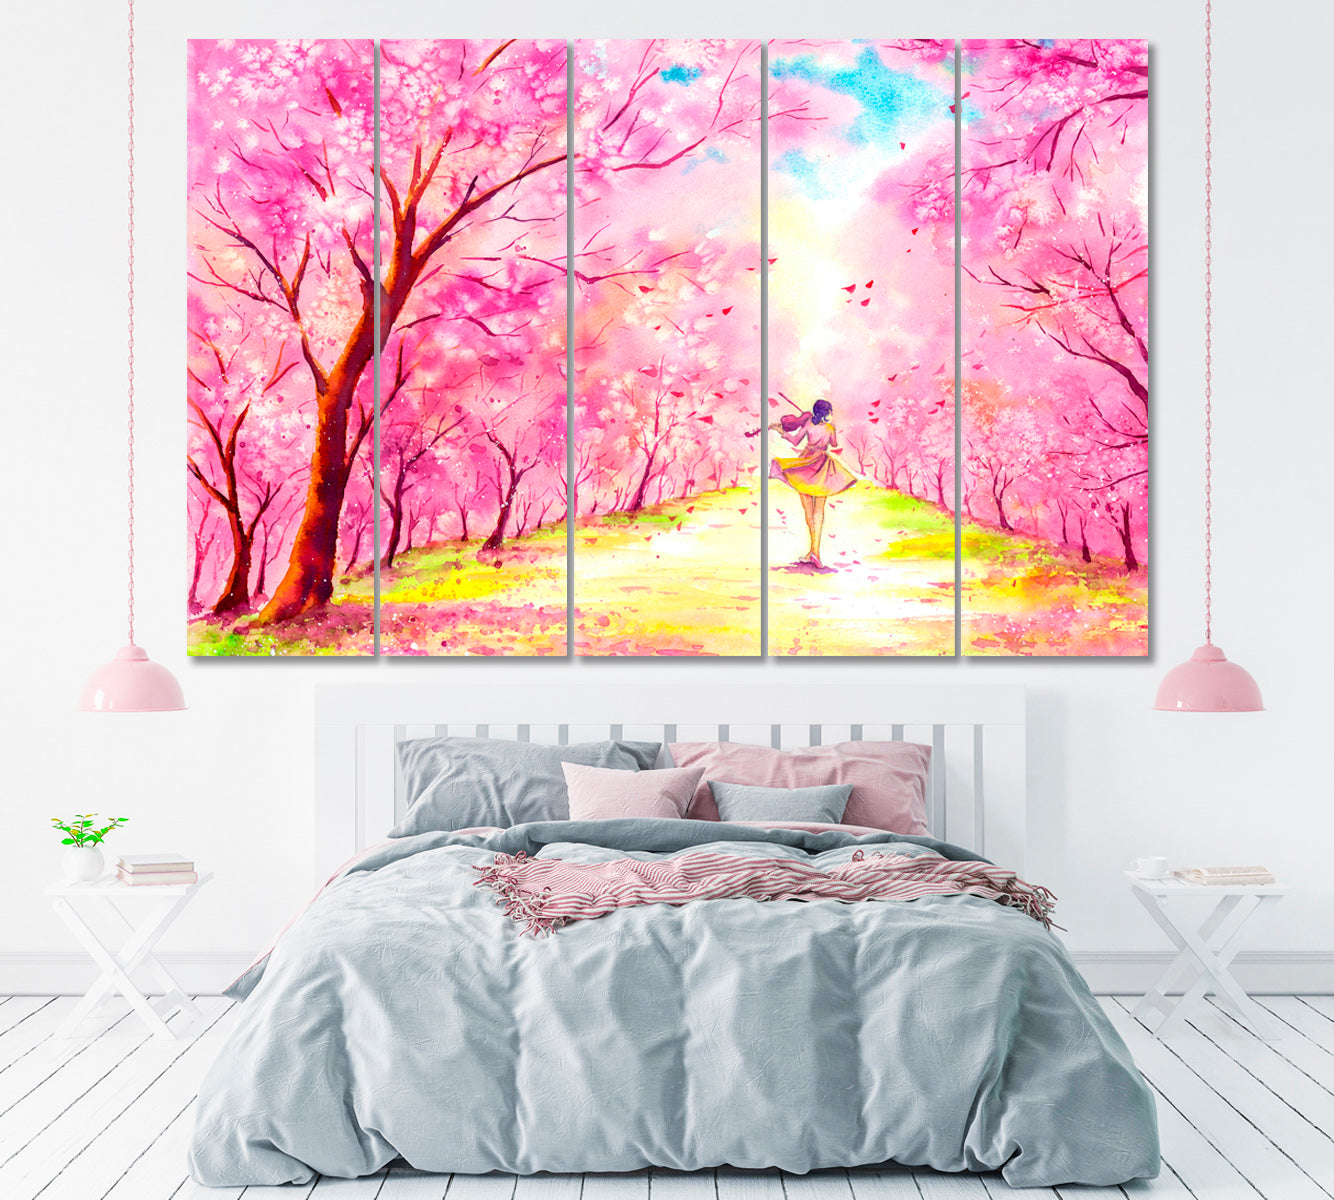 Landscape with Violinist and  Blooming Cherry Trees Canvas Print ArtLexy 5 Panels 36"x24" inches 